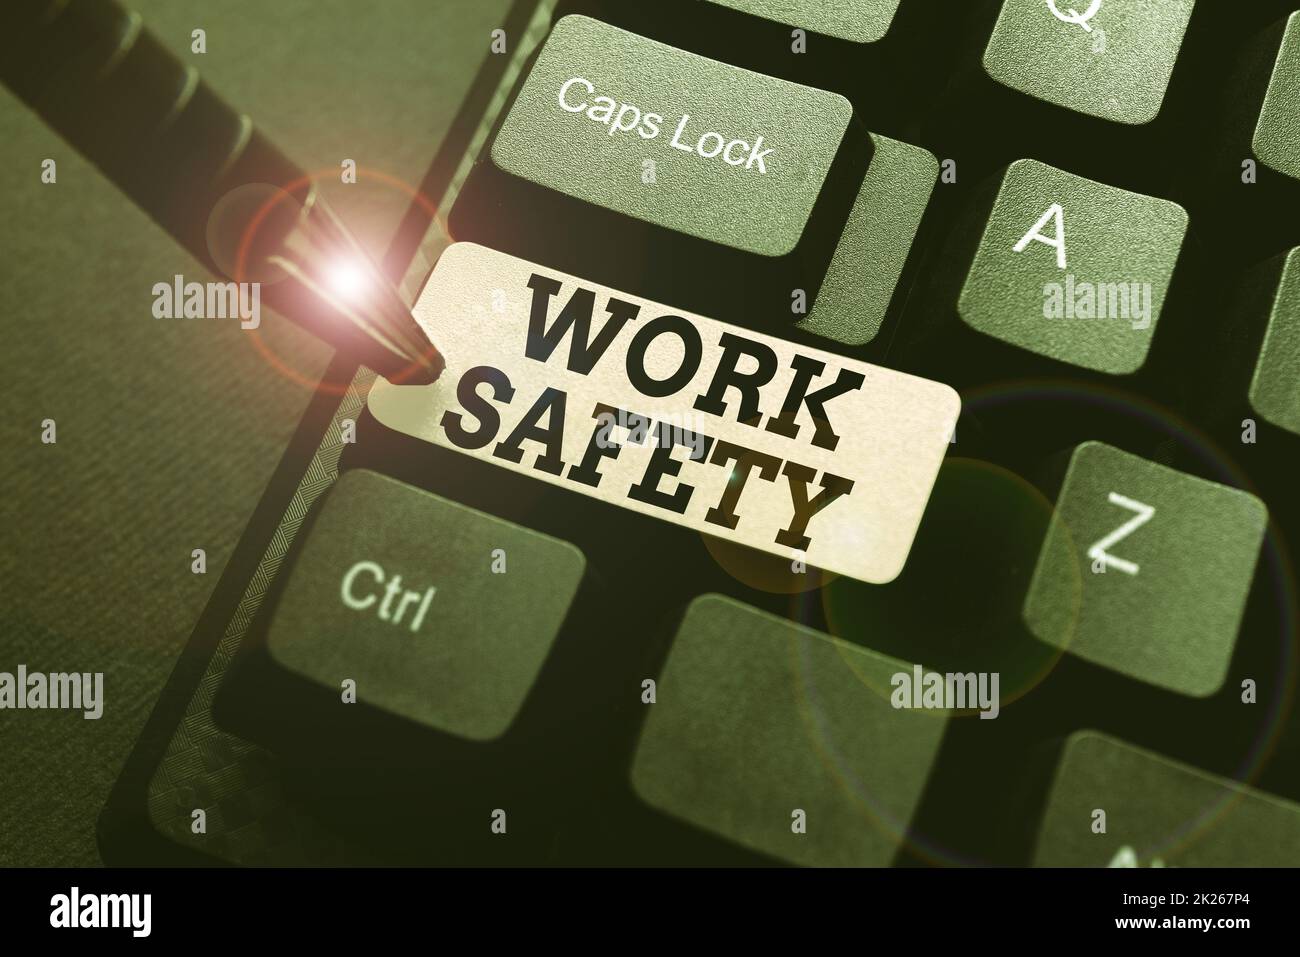 Writing displaying text Work Safety. Business approach preventive measures applied by firms to protect workers health Abstract Typing A Good Restaurant Review, Ordering Food Online Concept Stock Photo